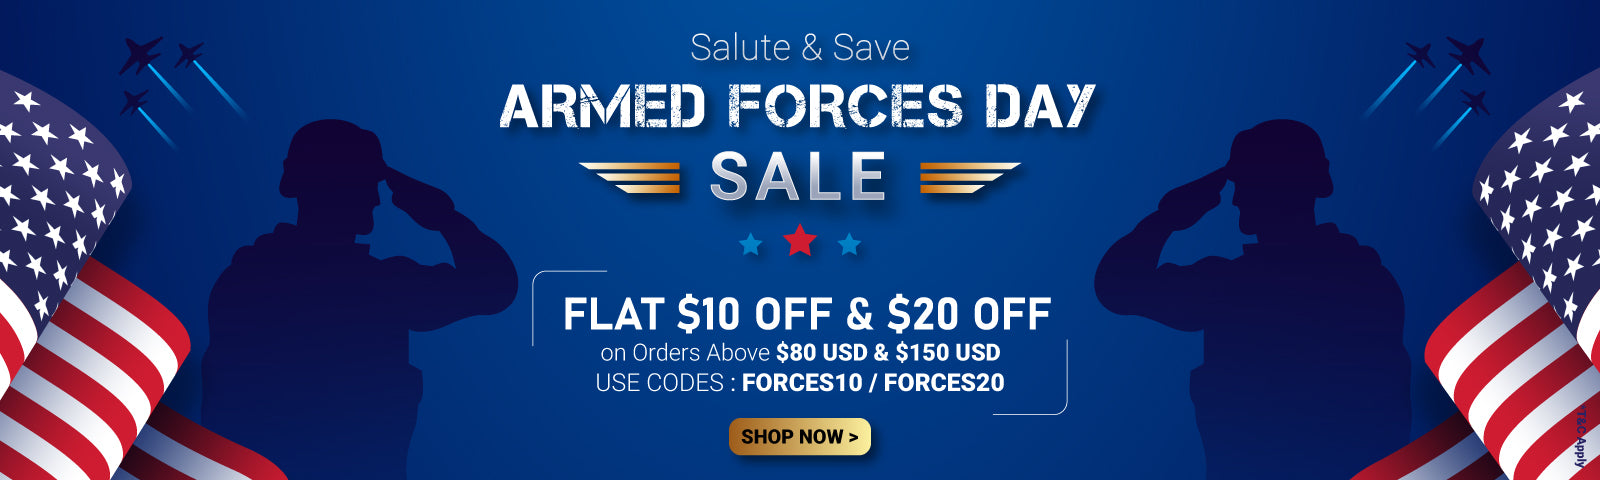 Armed Forces Day Sale